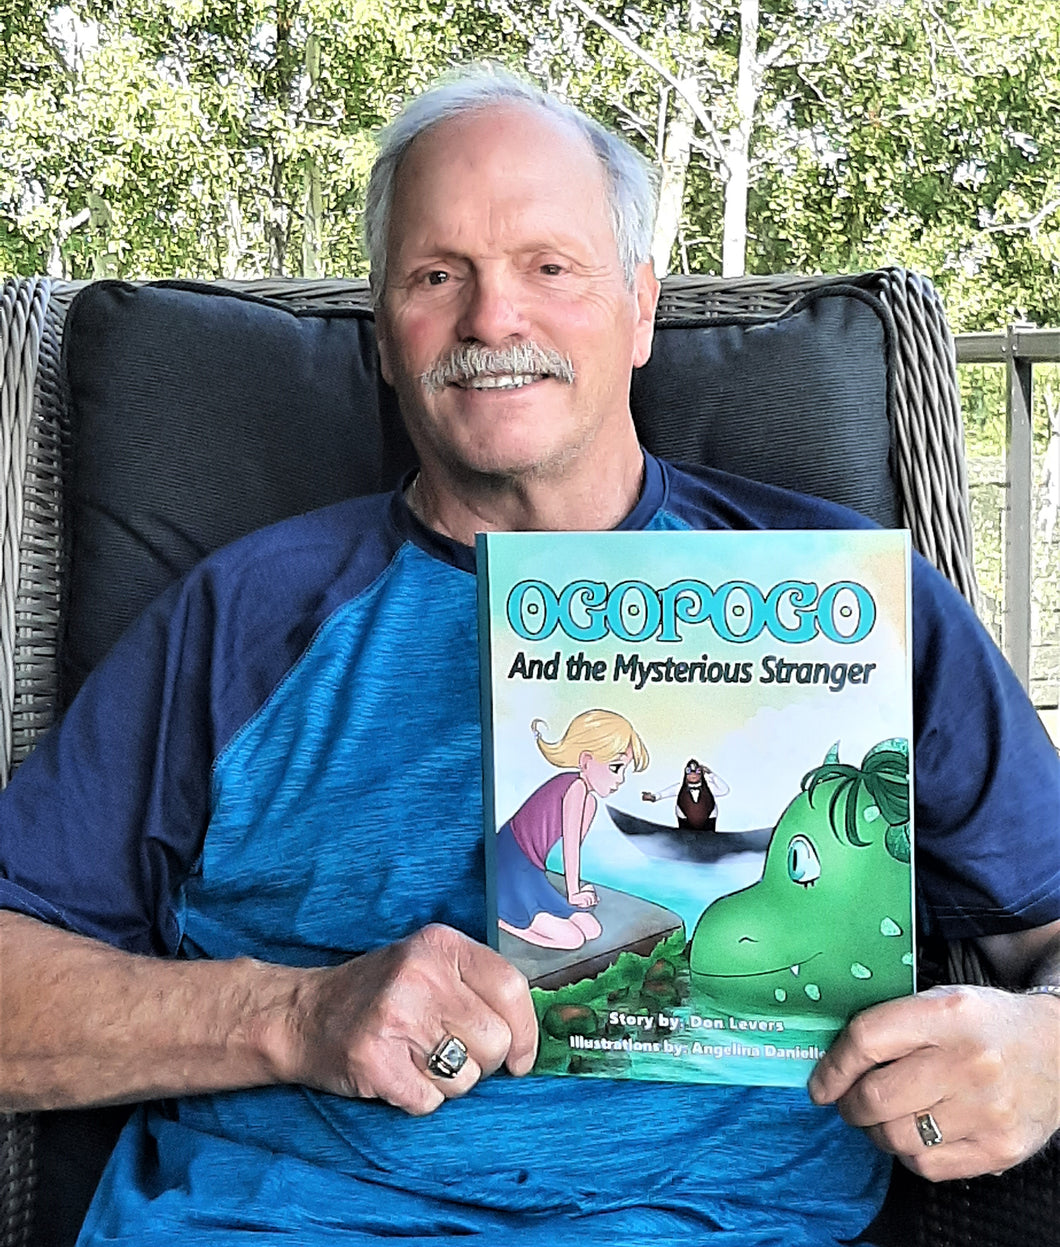 Signed by Author - Ogopogo: And the Mysterious Stranger